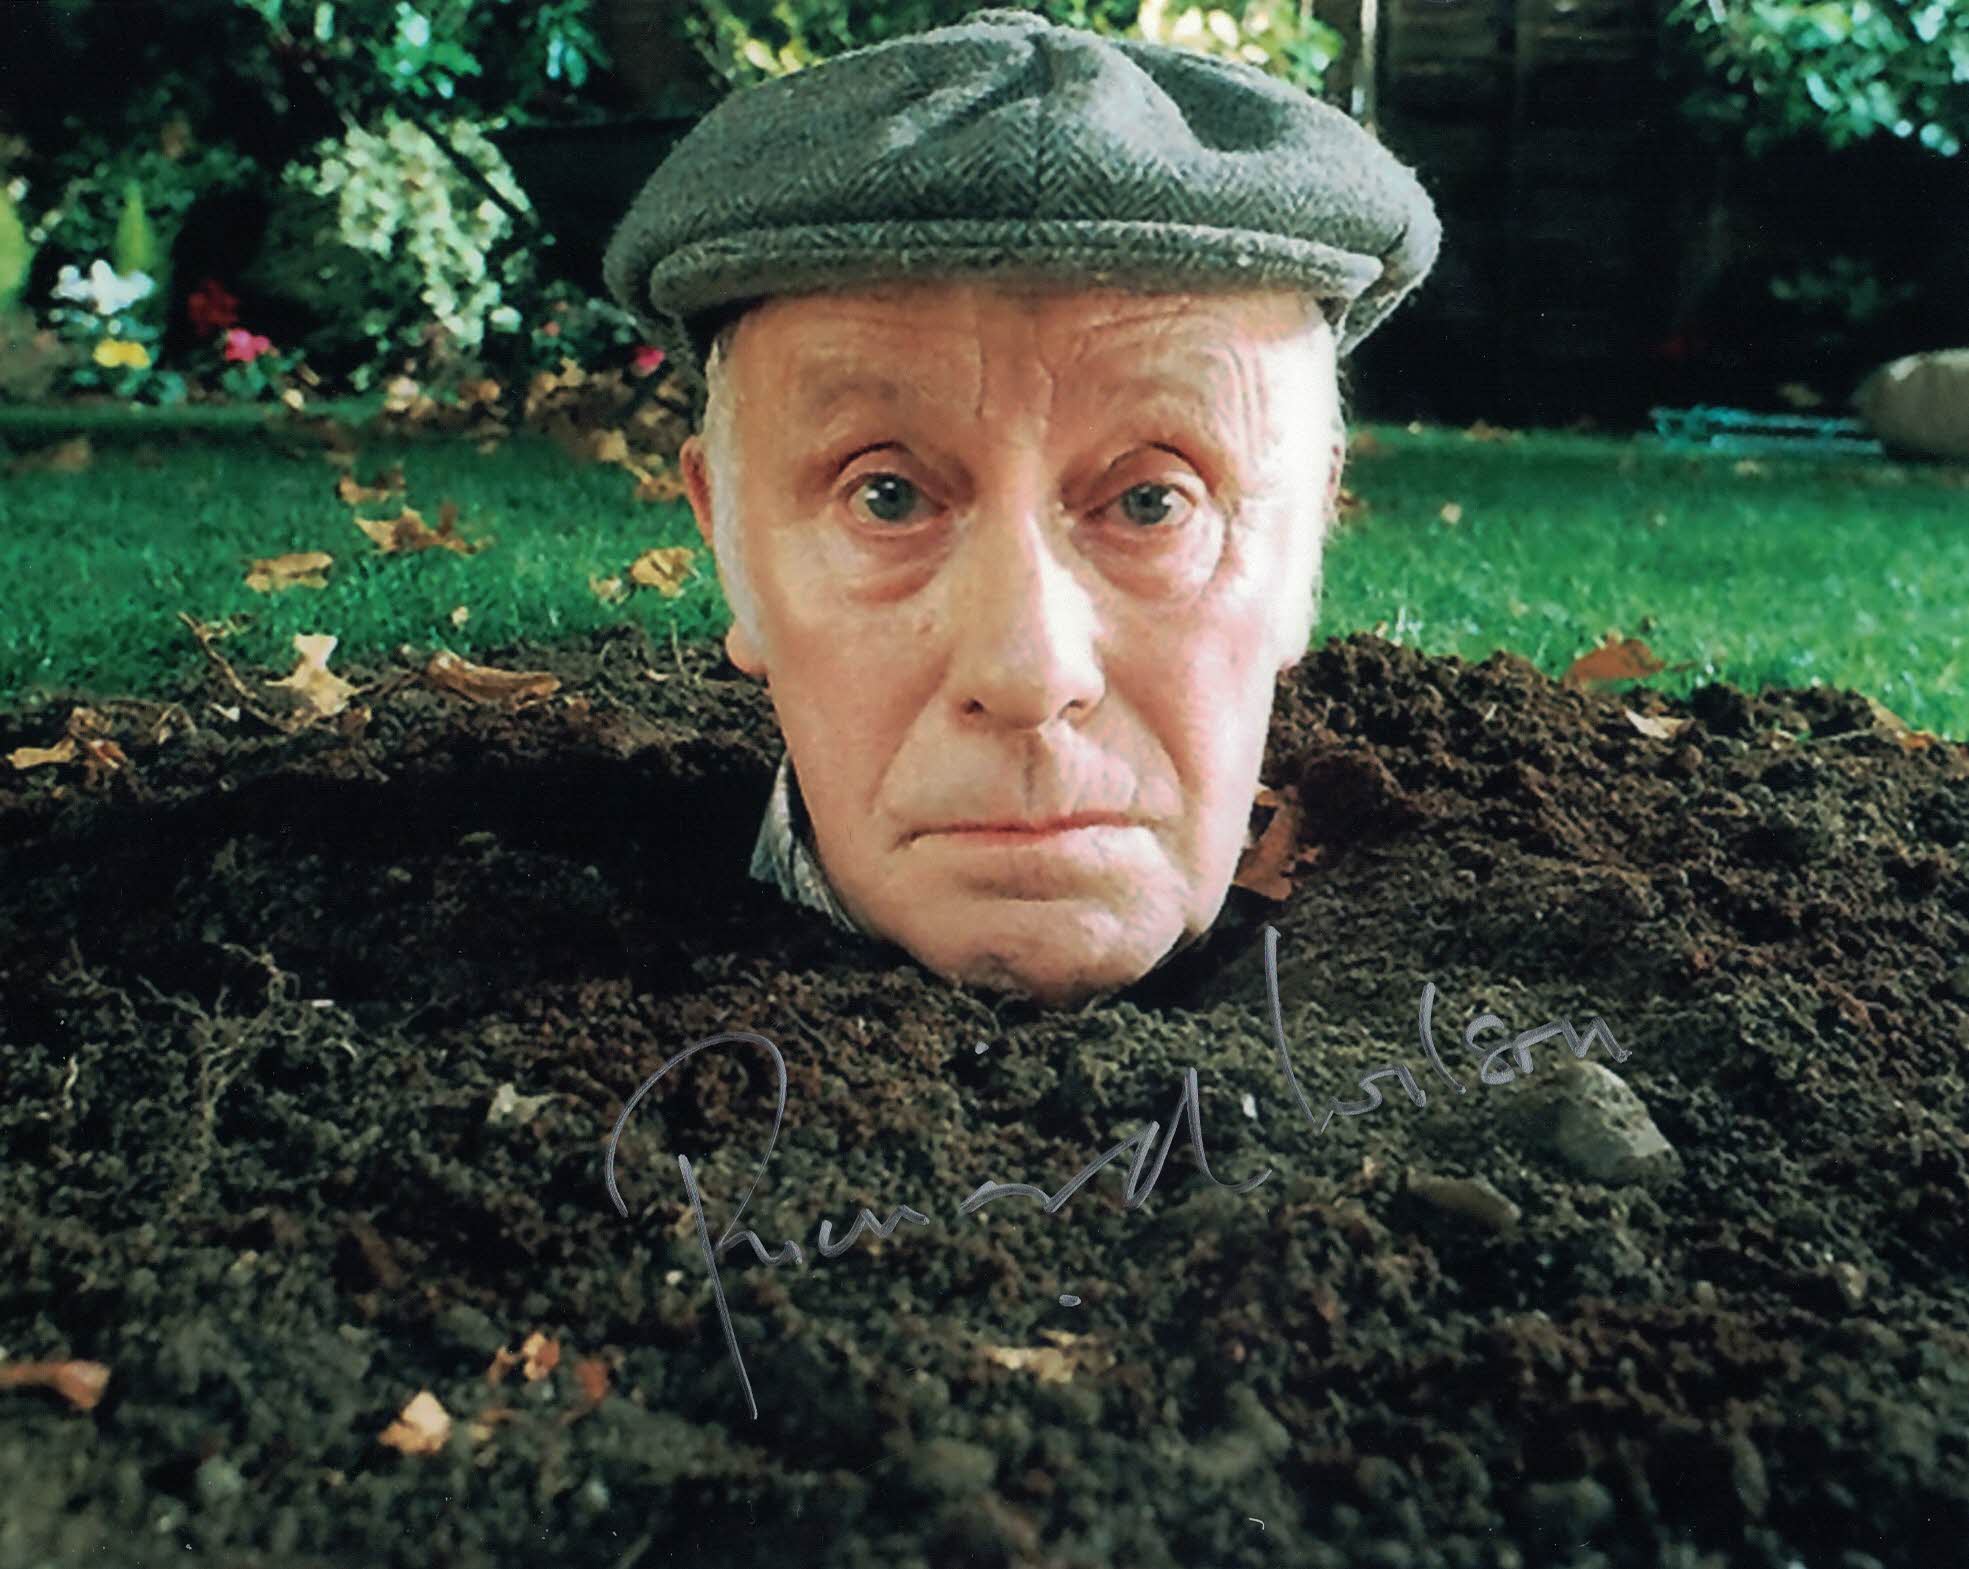 RICHARD WILSON - Victor Meldrew - One Foot In The Grave hand signed 10 x 8 photo